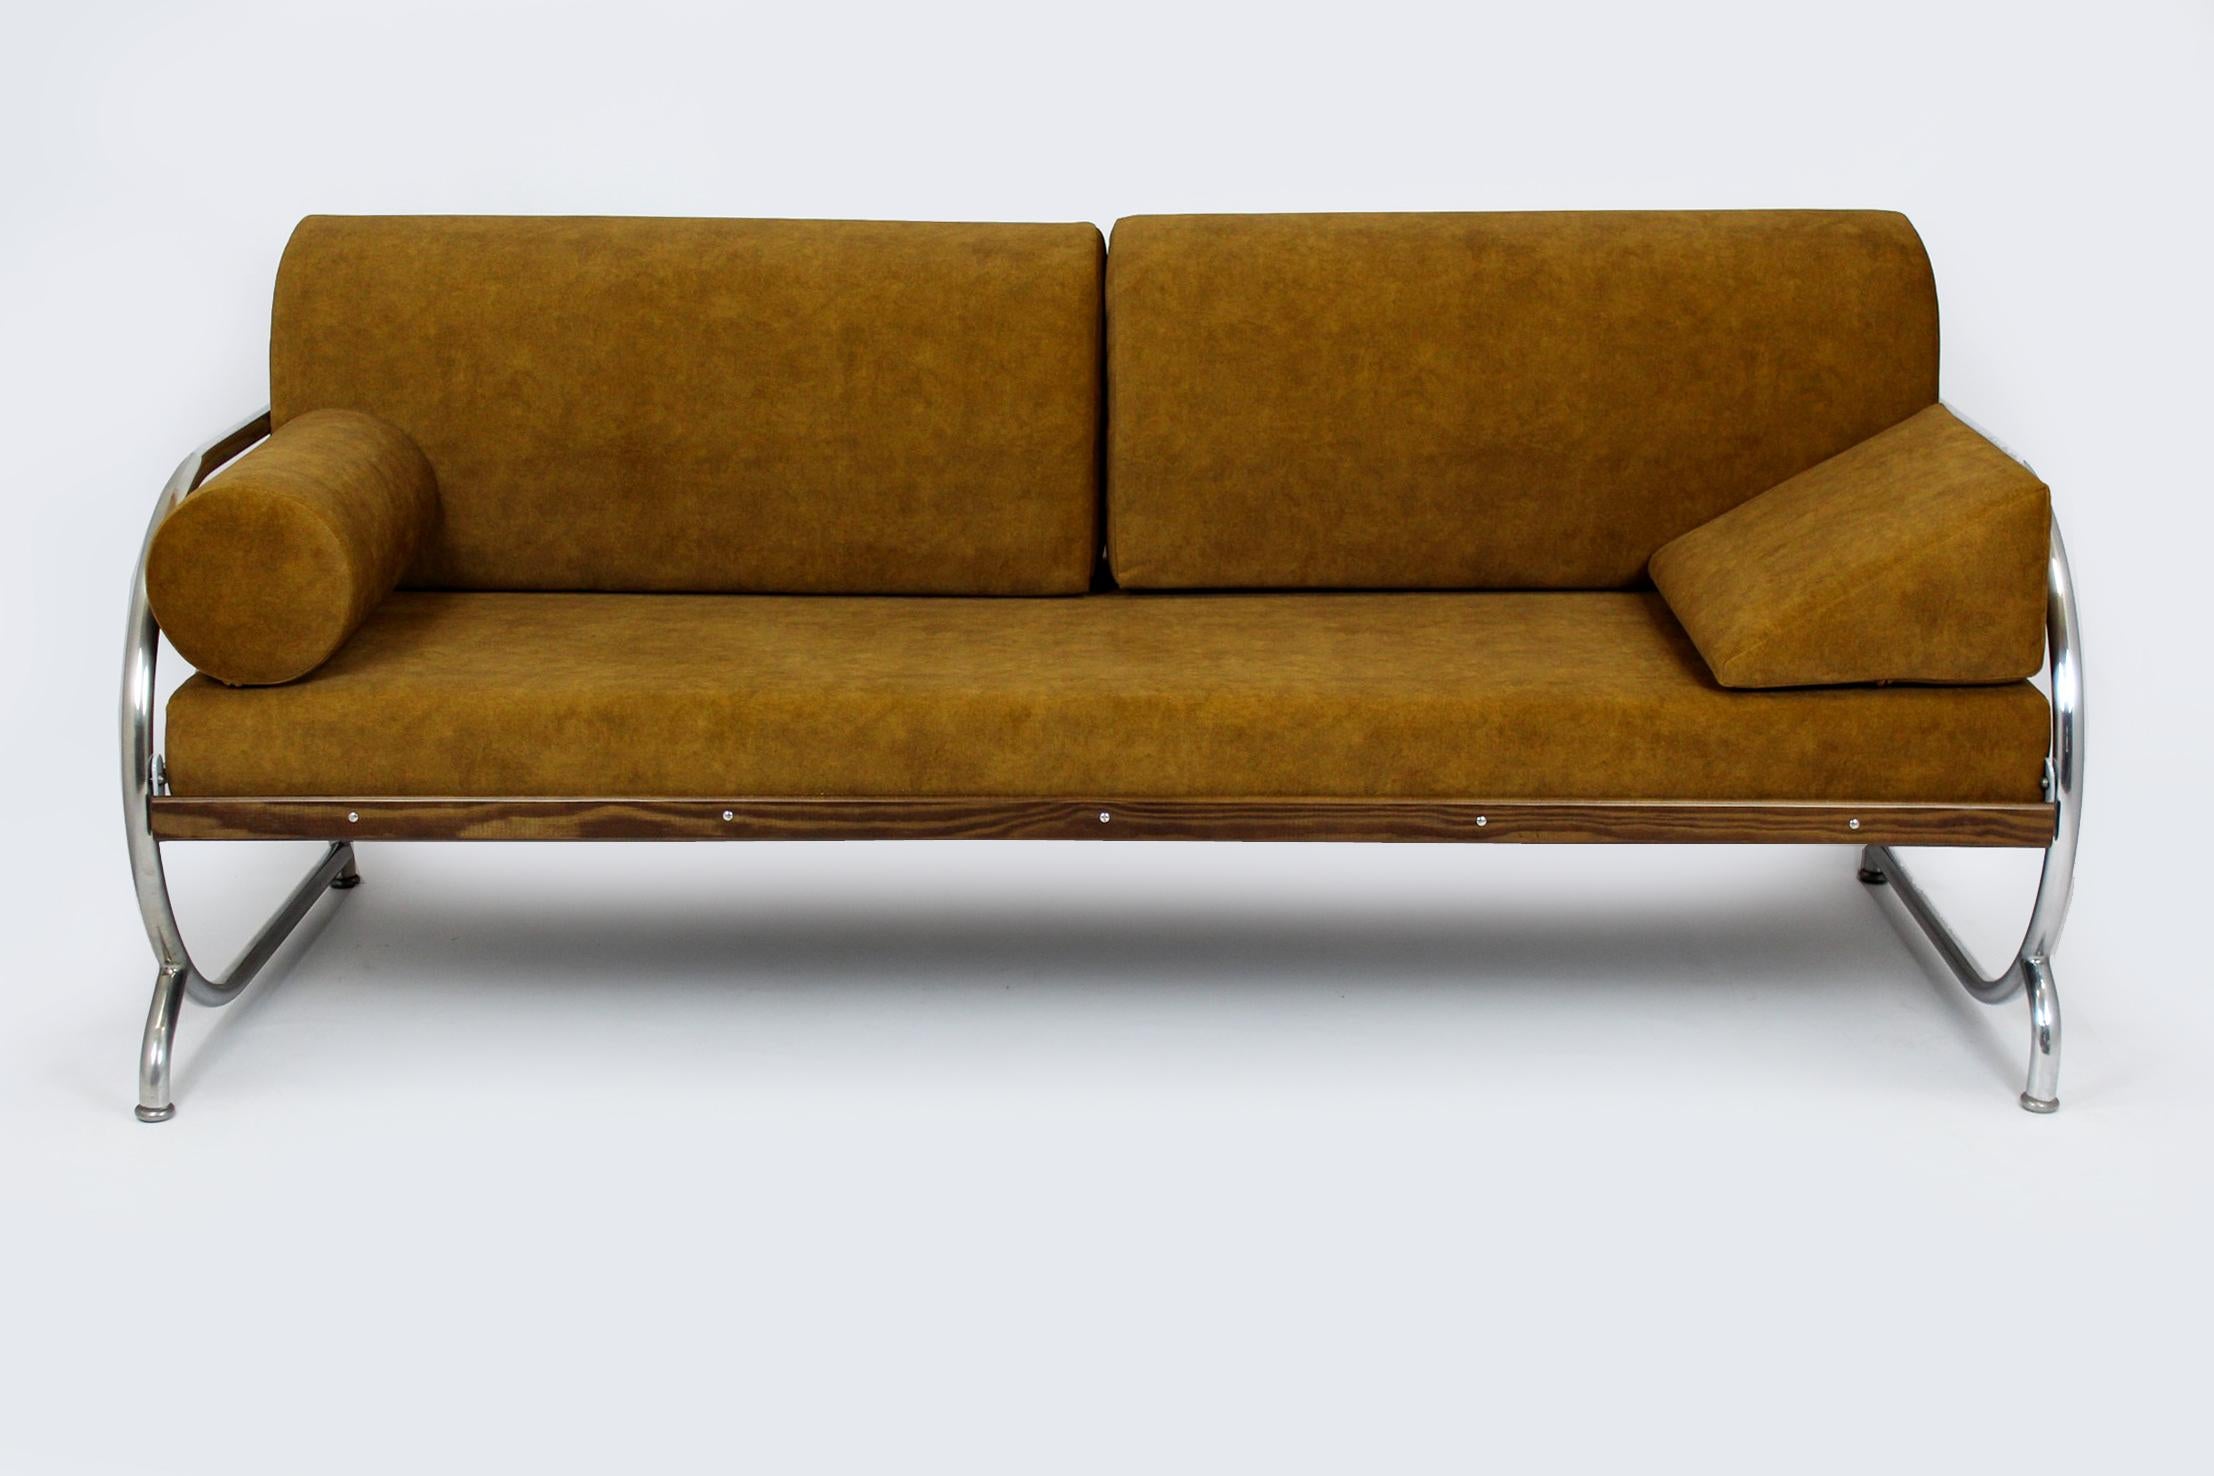 
This Bauhaus style sofa was produced by Hynek Gottwald in the 1930s. The sofa has been completely restored, it has brand new mattresses upholstered in easy-to-clean fabric. The woodwork has been lacquered, glossy finish. Chrome is in original, good